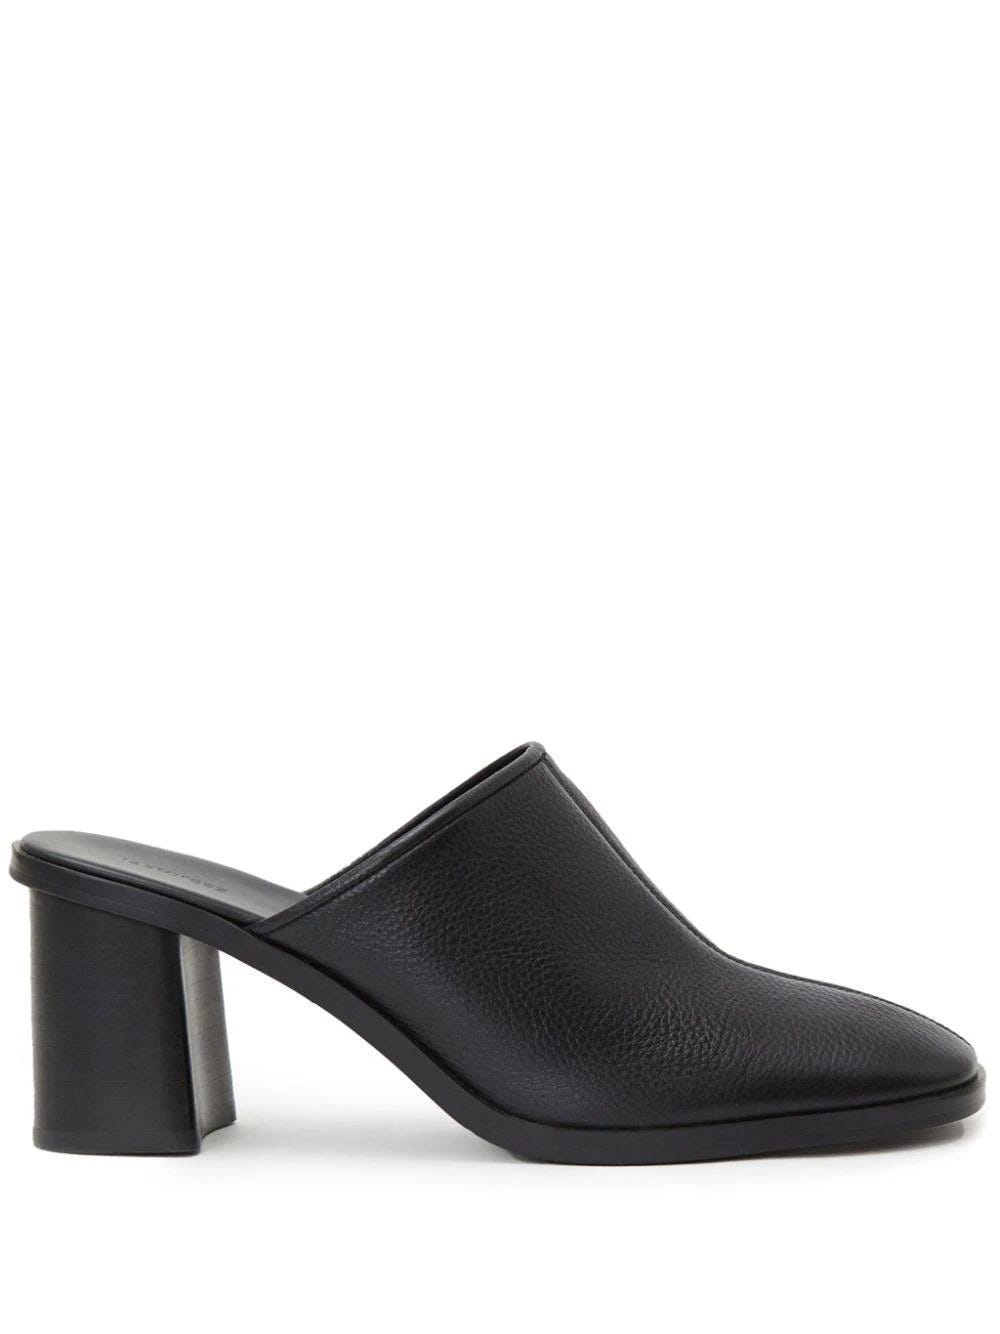 Black Leather Square Toe Mule 65mm by 12 STOREEZ | Image